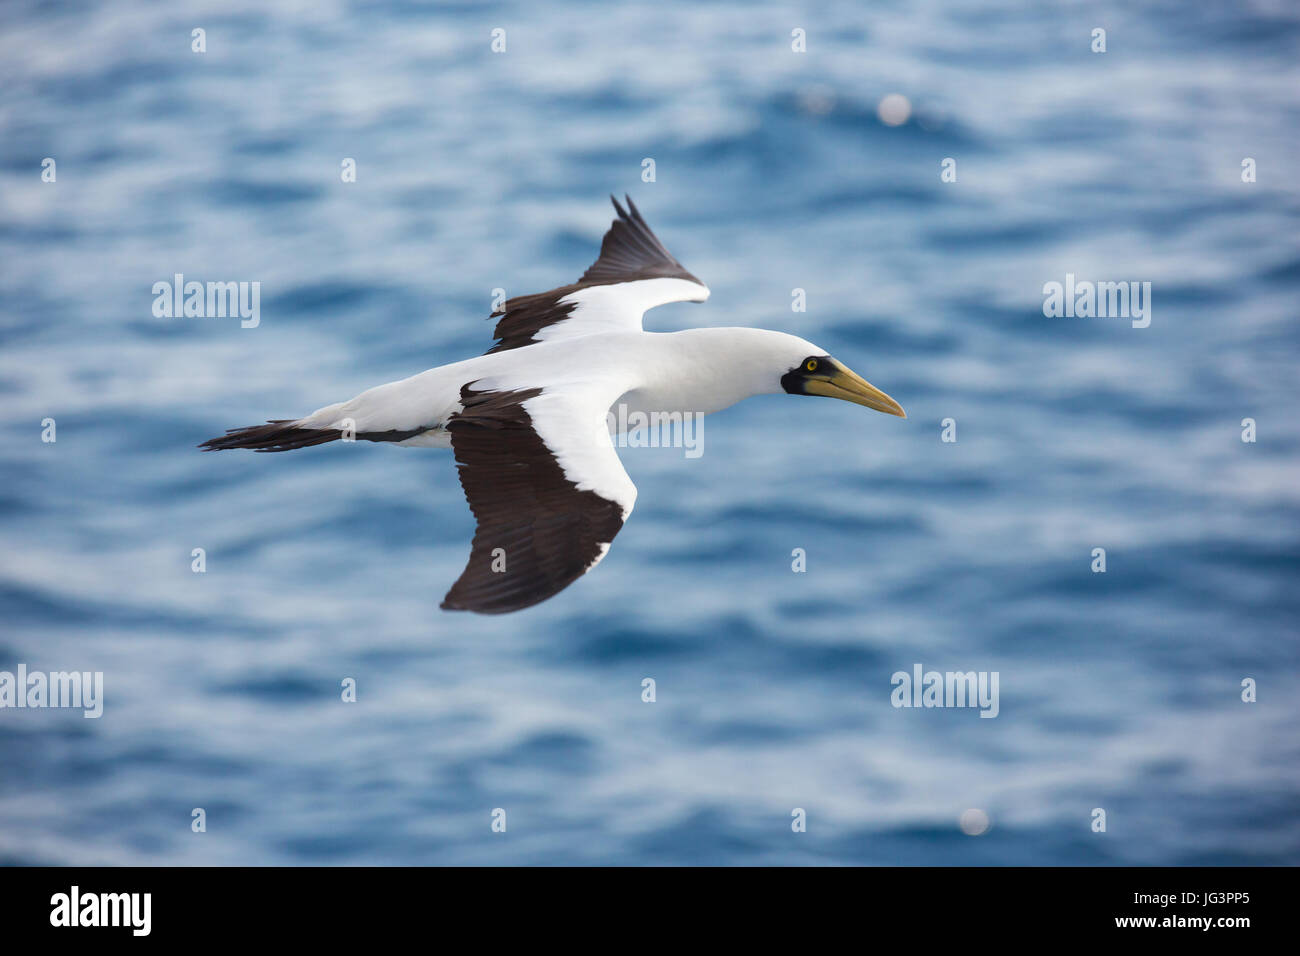 Masked booby passing by at close distance. Selective focus on the body of the bird Stock Photo